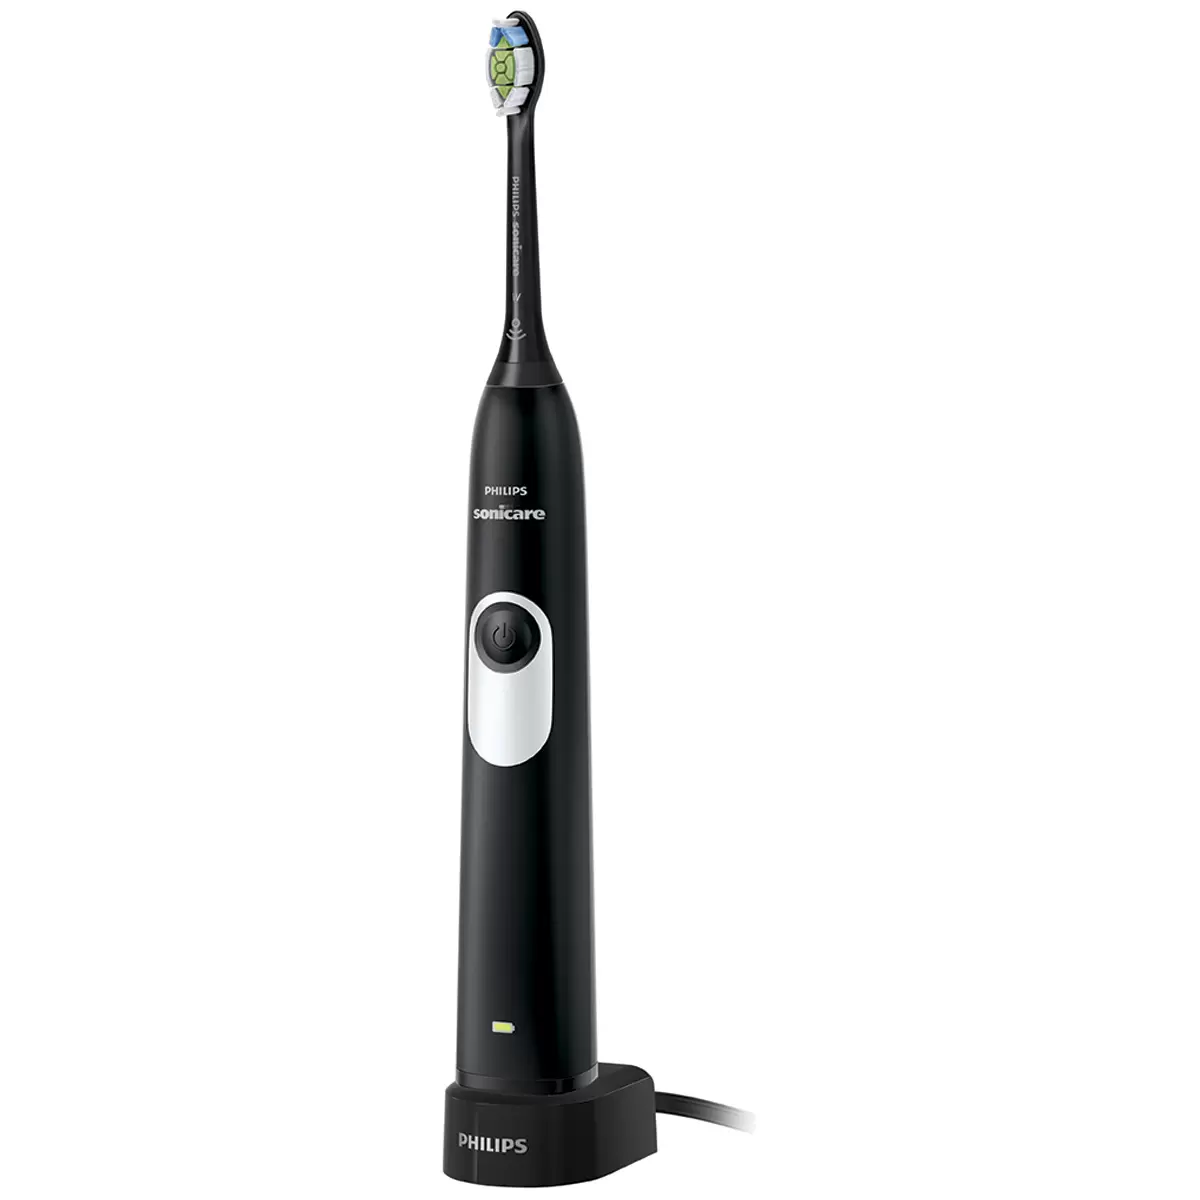 Philips Sonicare 2 Series Electric Toothbrush 2 Pack HX6232/74